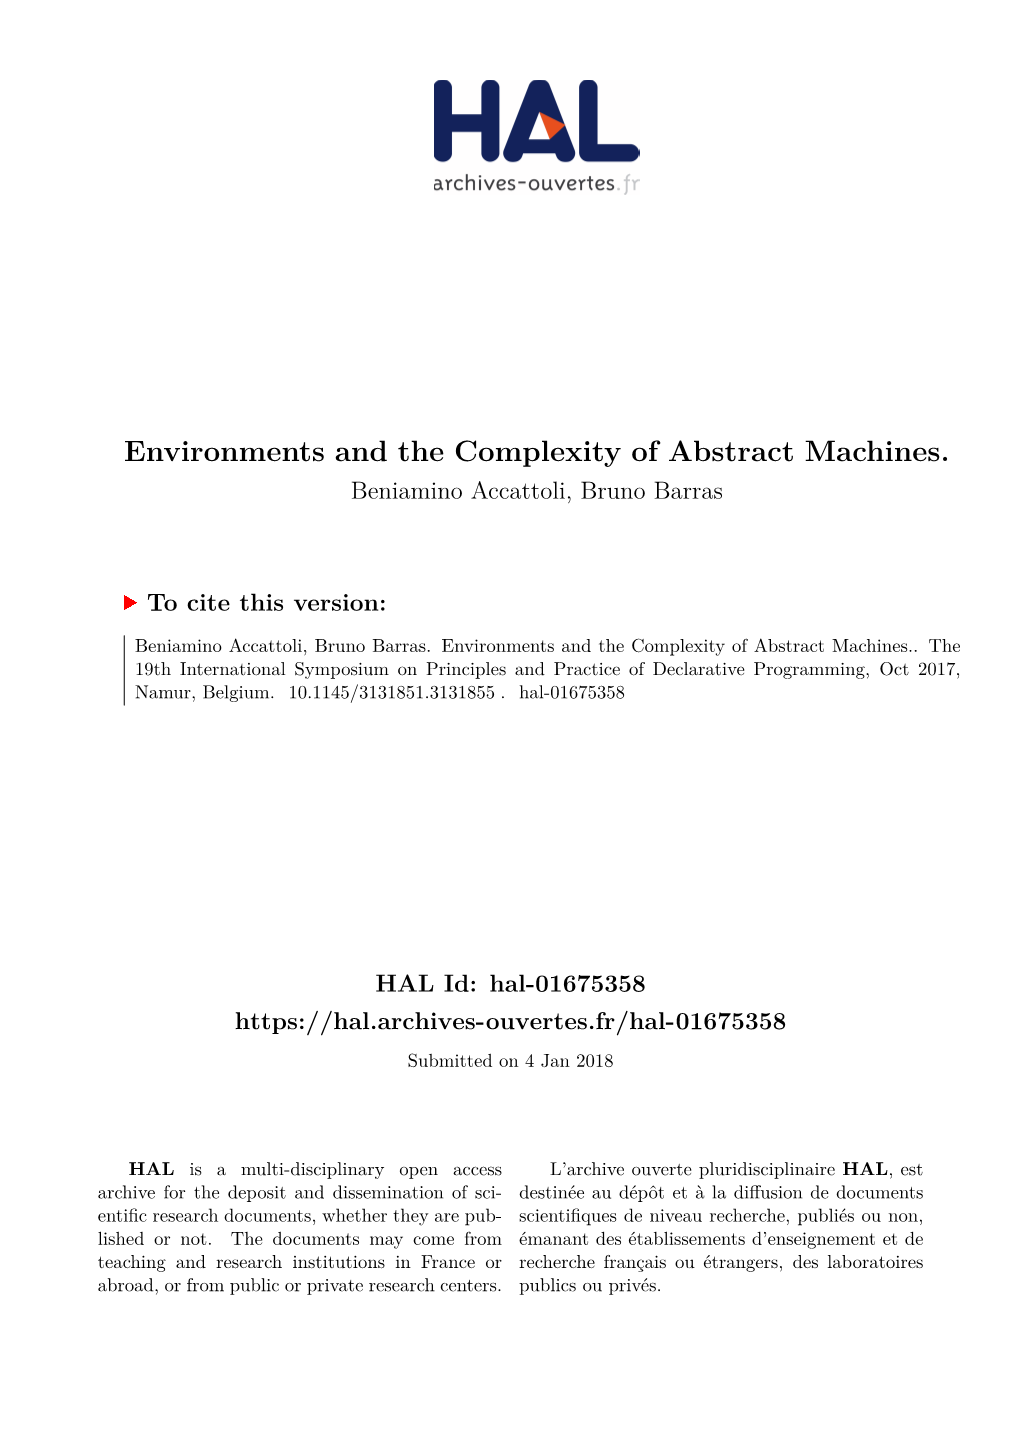 Environments and the Complexity of Abstract Machines. Beniamino Accattoli, Bruno Barras